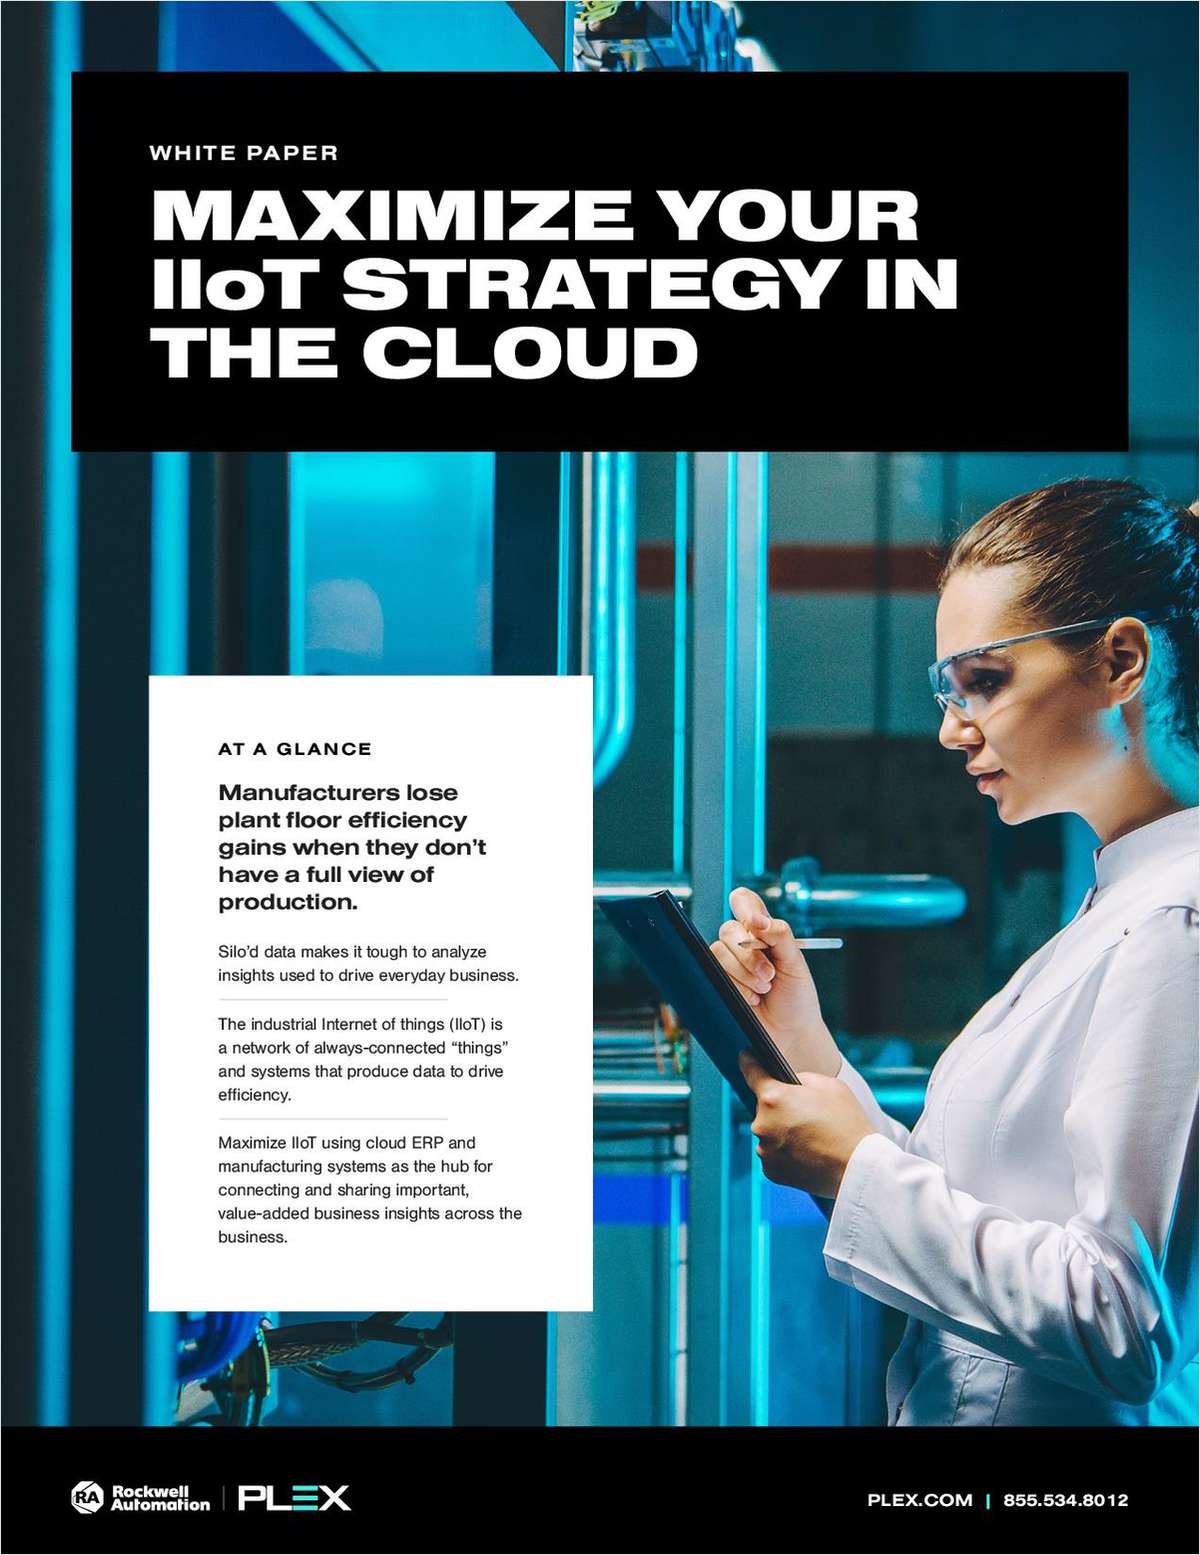 Maximize your IIoT Strategy in the Cloud